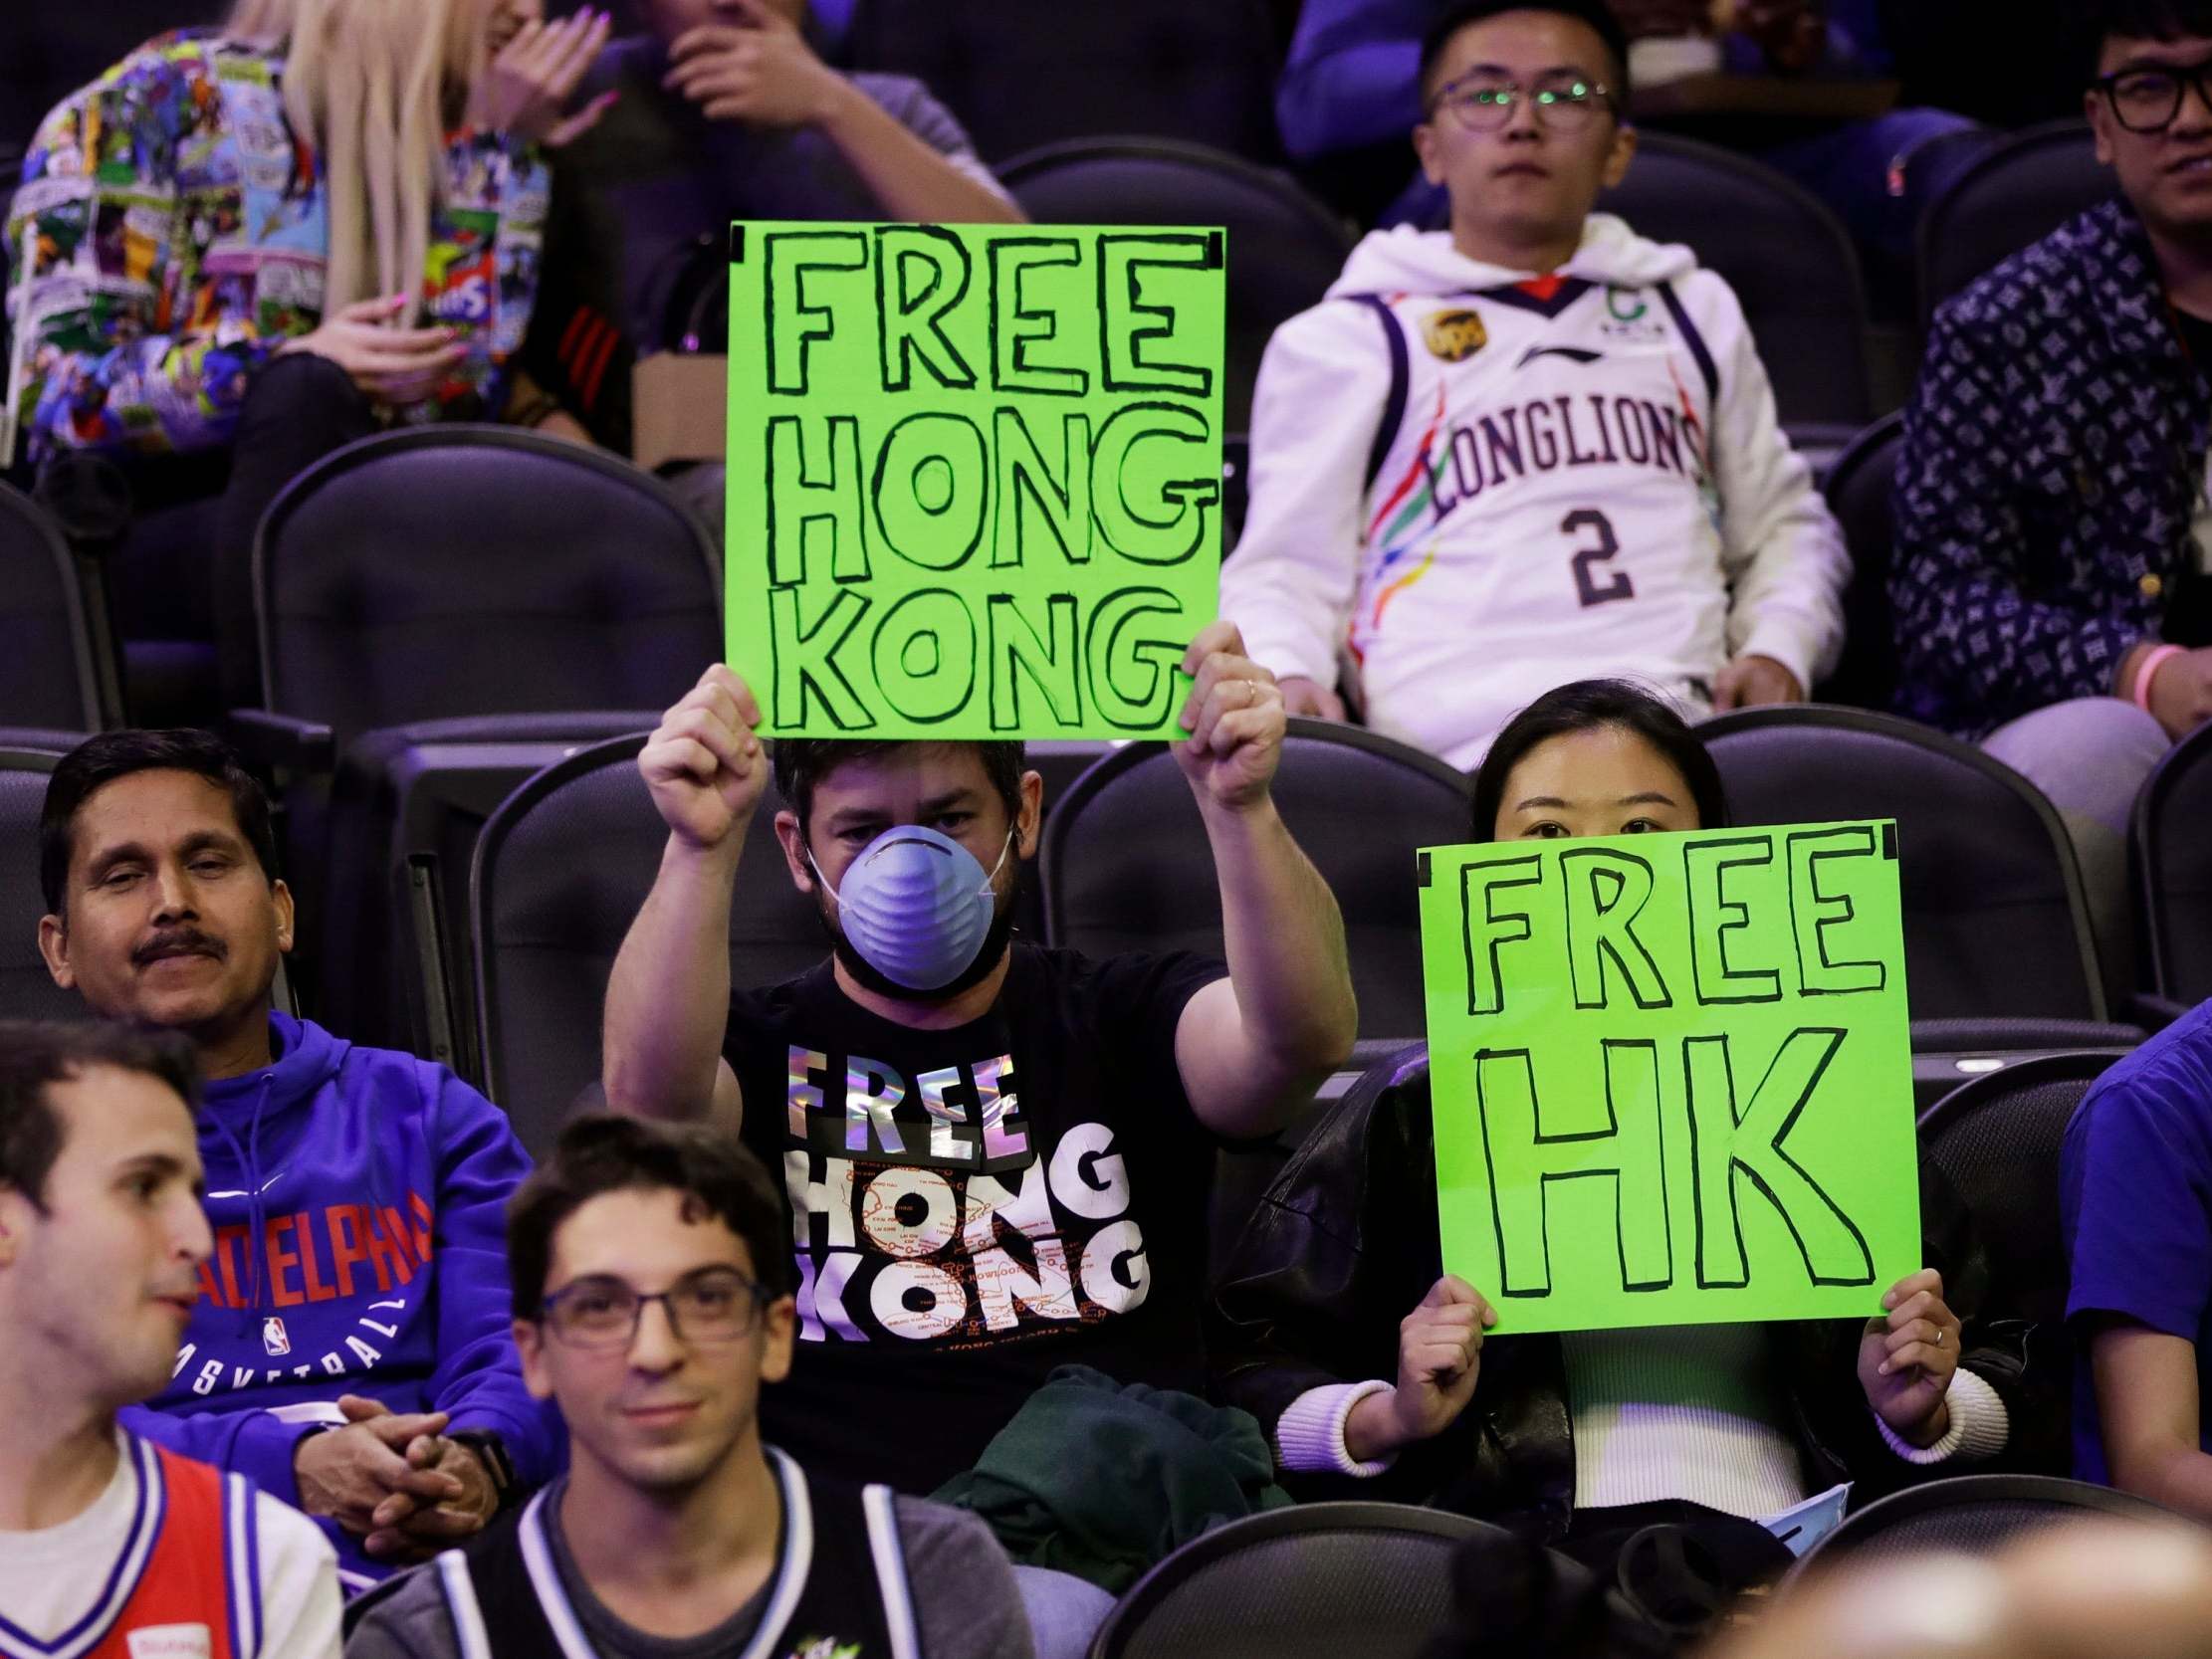 NBA fan ejected from game for supporting Hong Kong amid China controversy